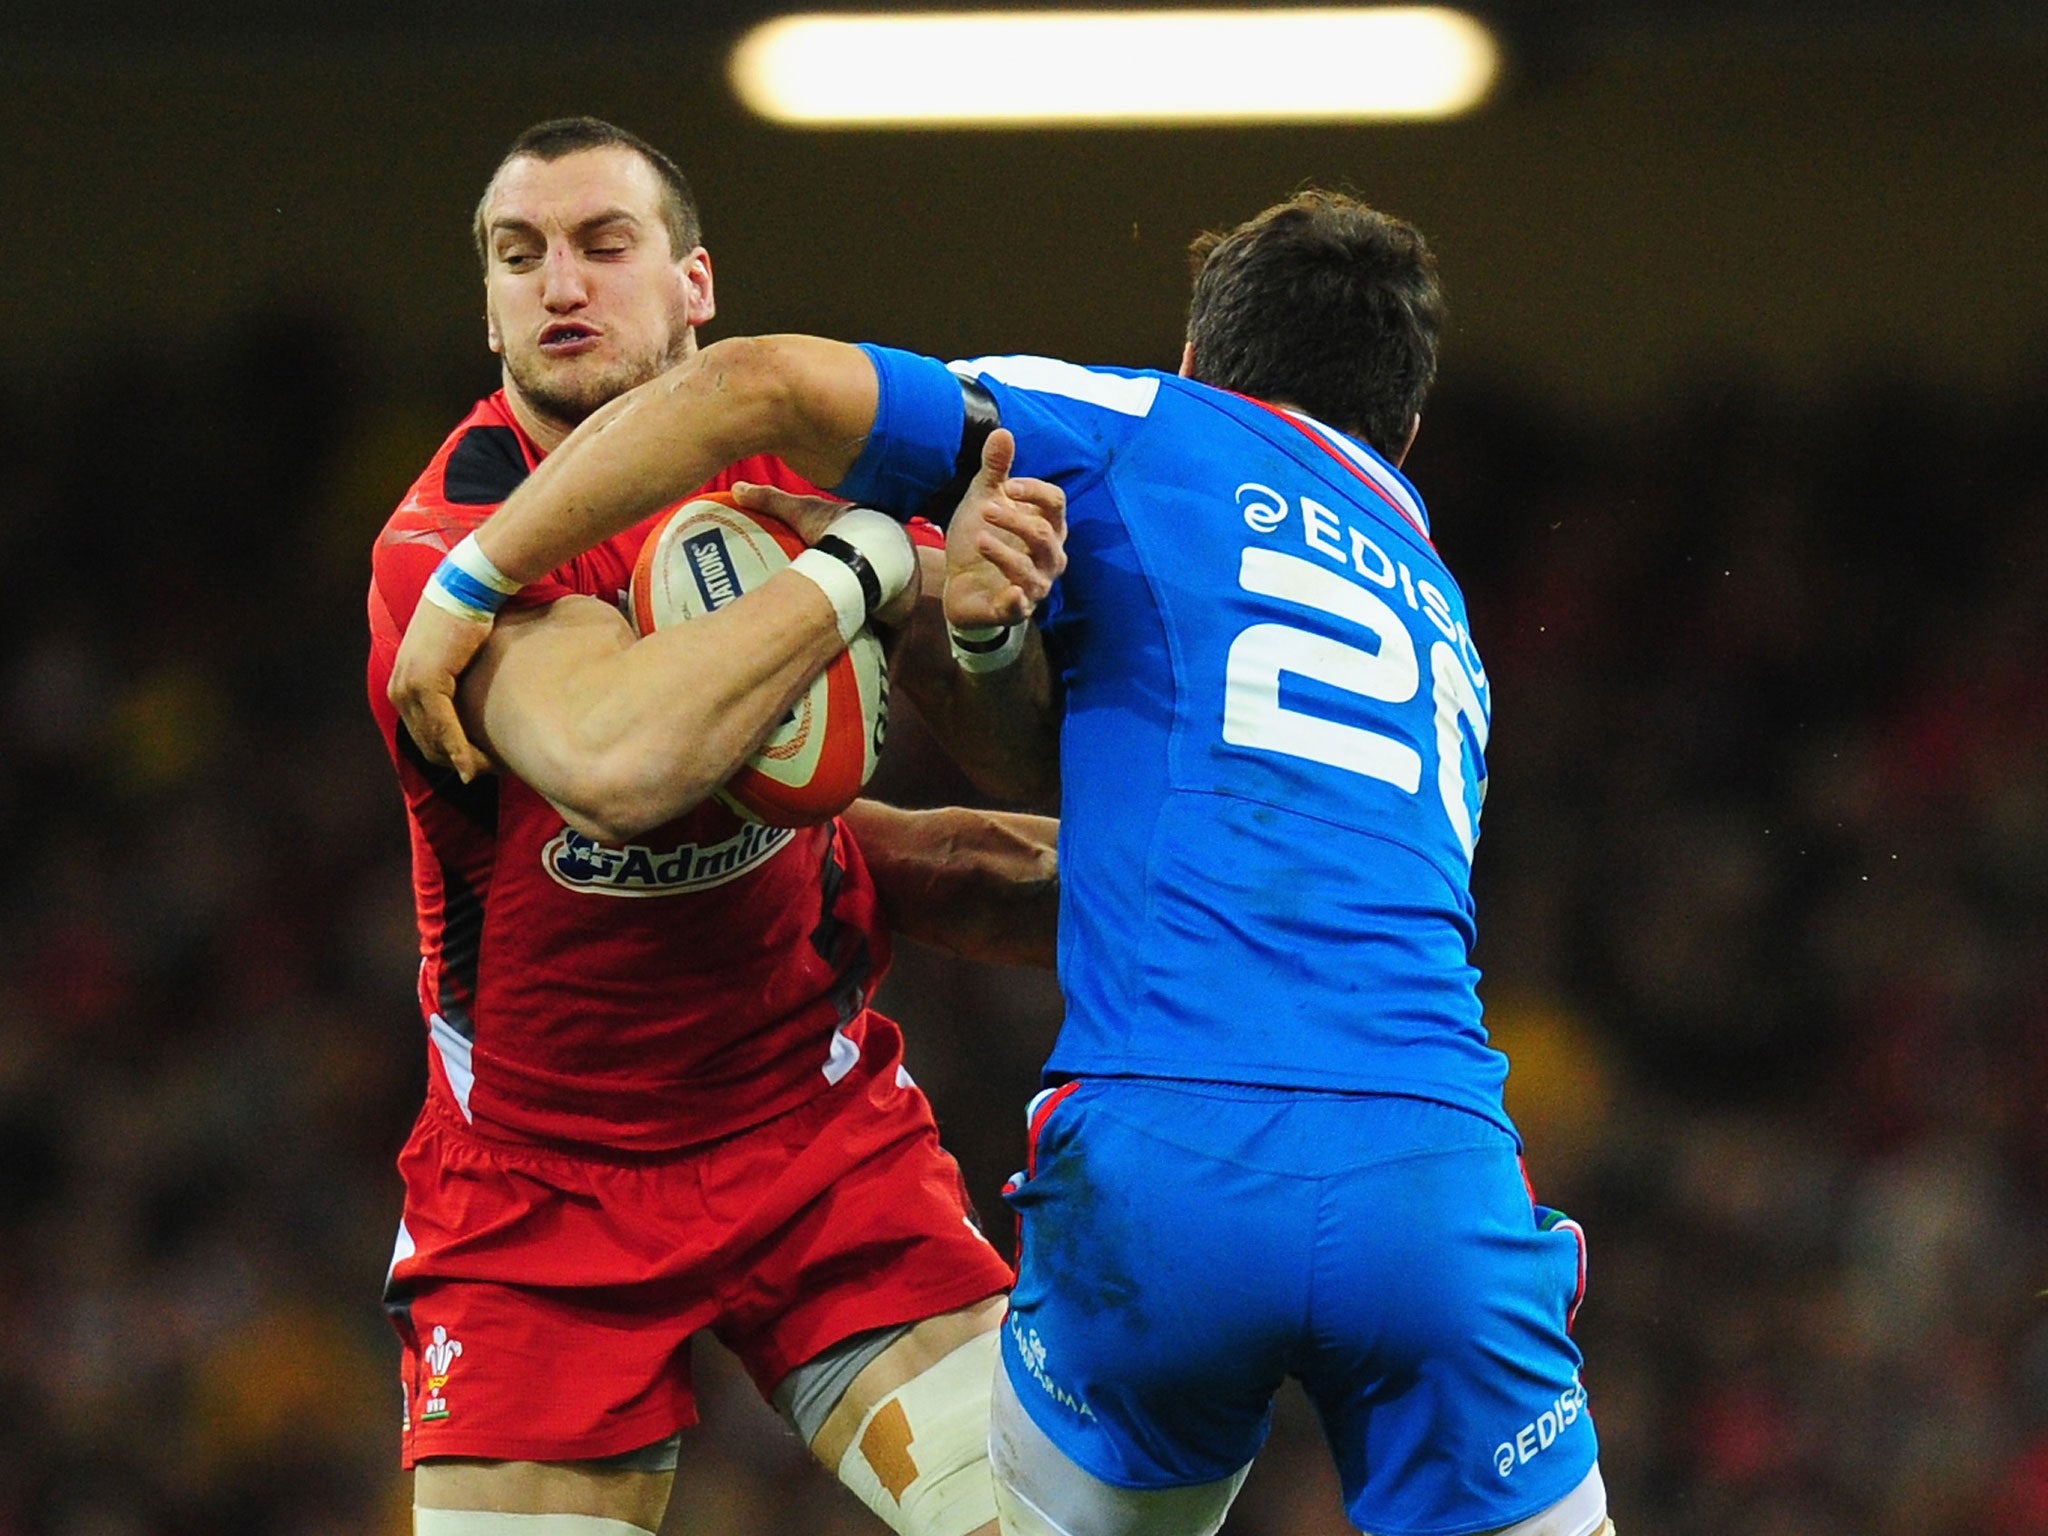 Sam Warburton will lead Wales out in Dublin as he returns from a shoulder injury for the Six Nations clash with Ireland